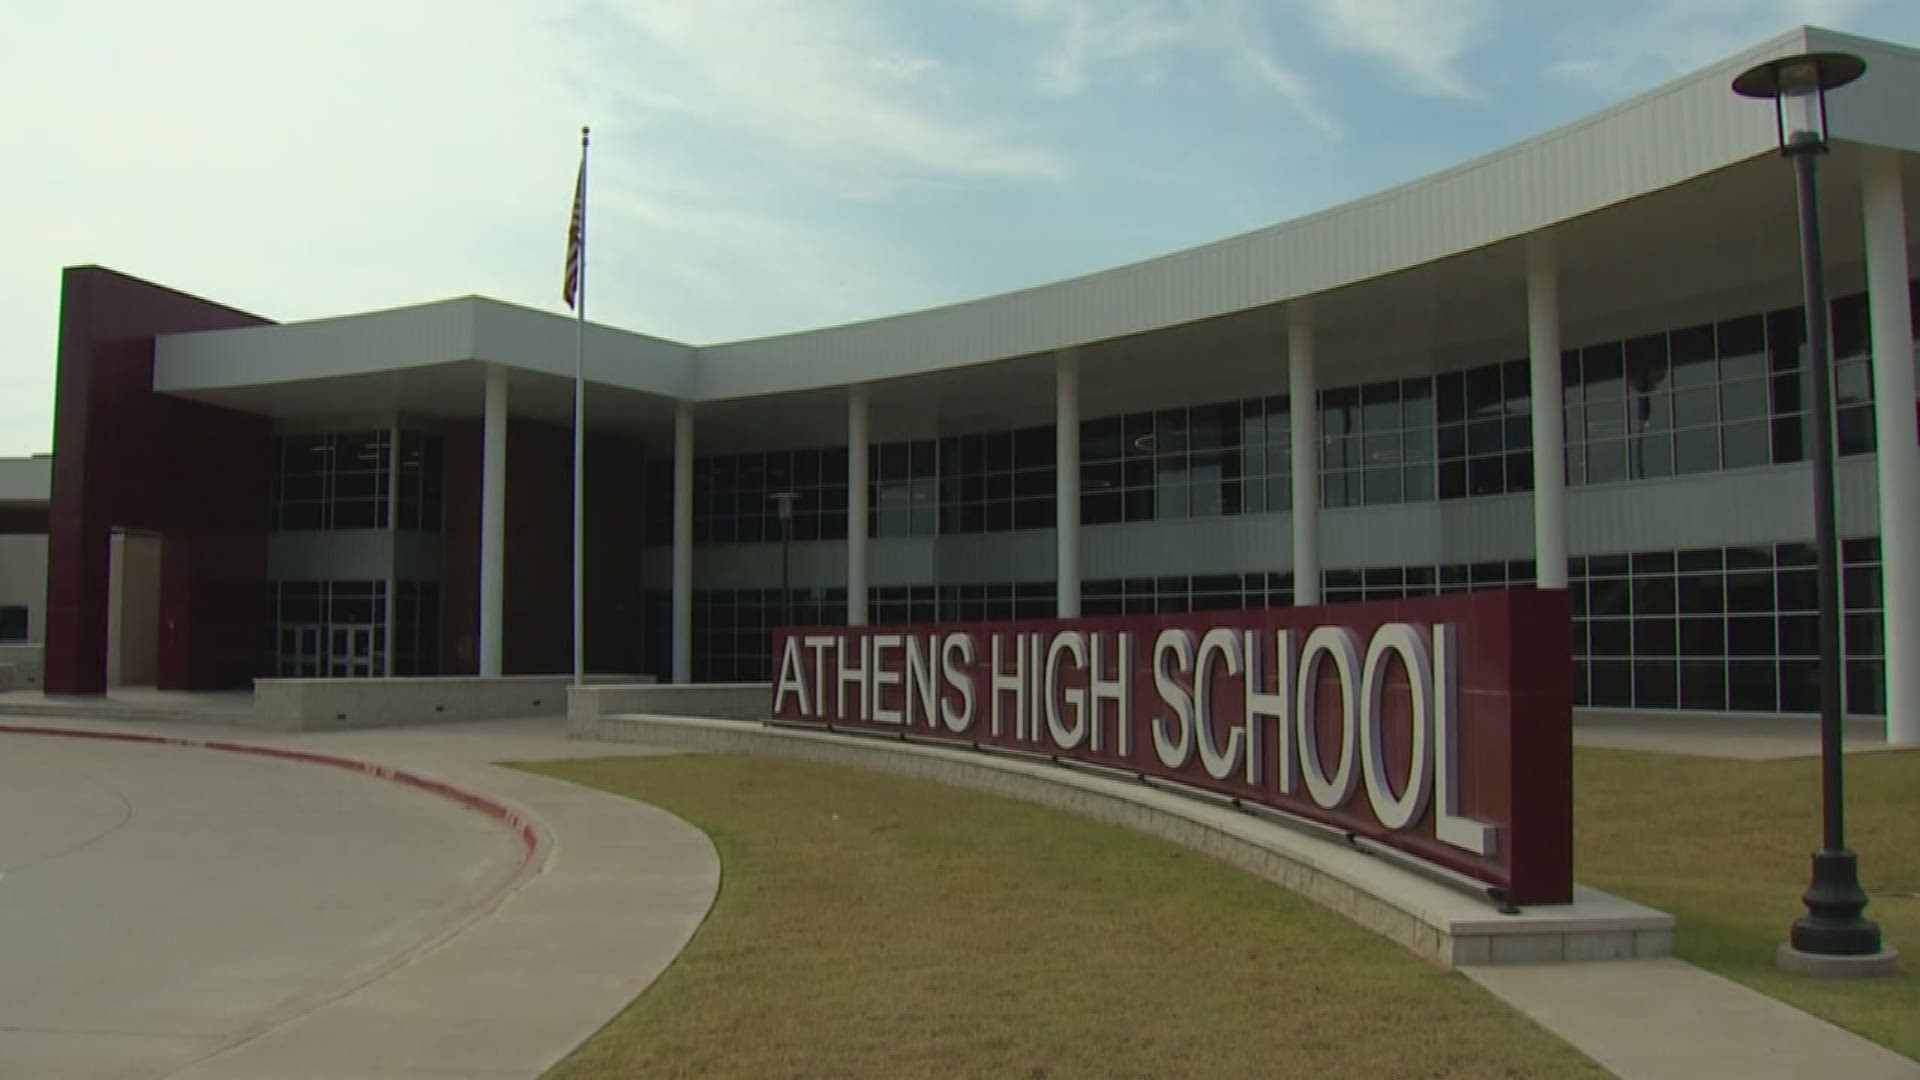 The roughly 3,000 Athens ISD students will begin a new, four-day instructional week starting this school year.